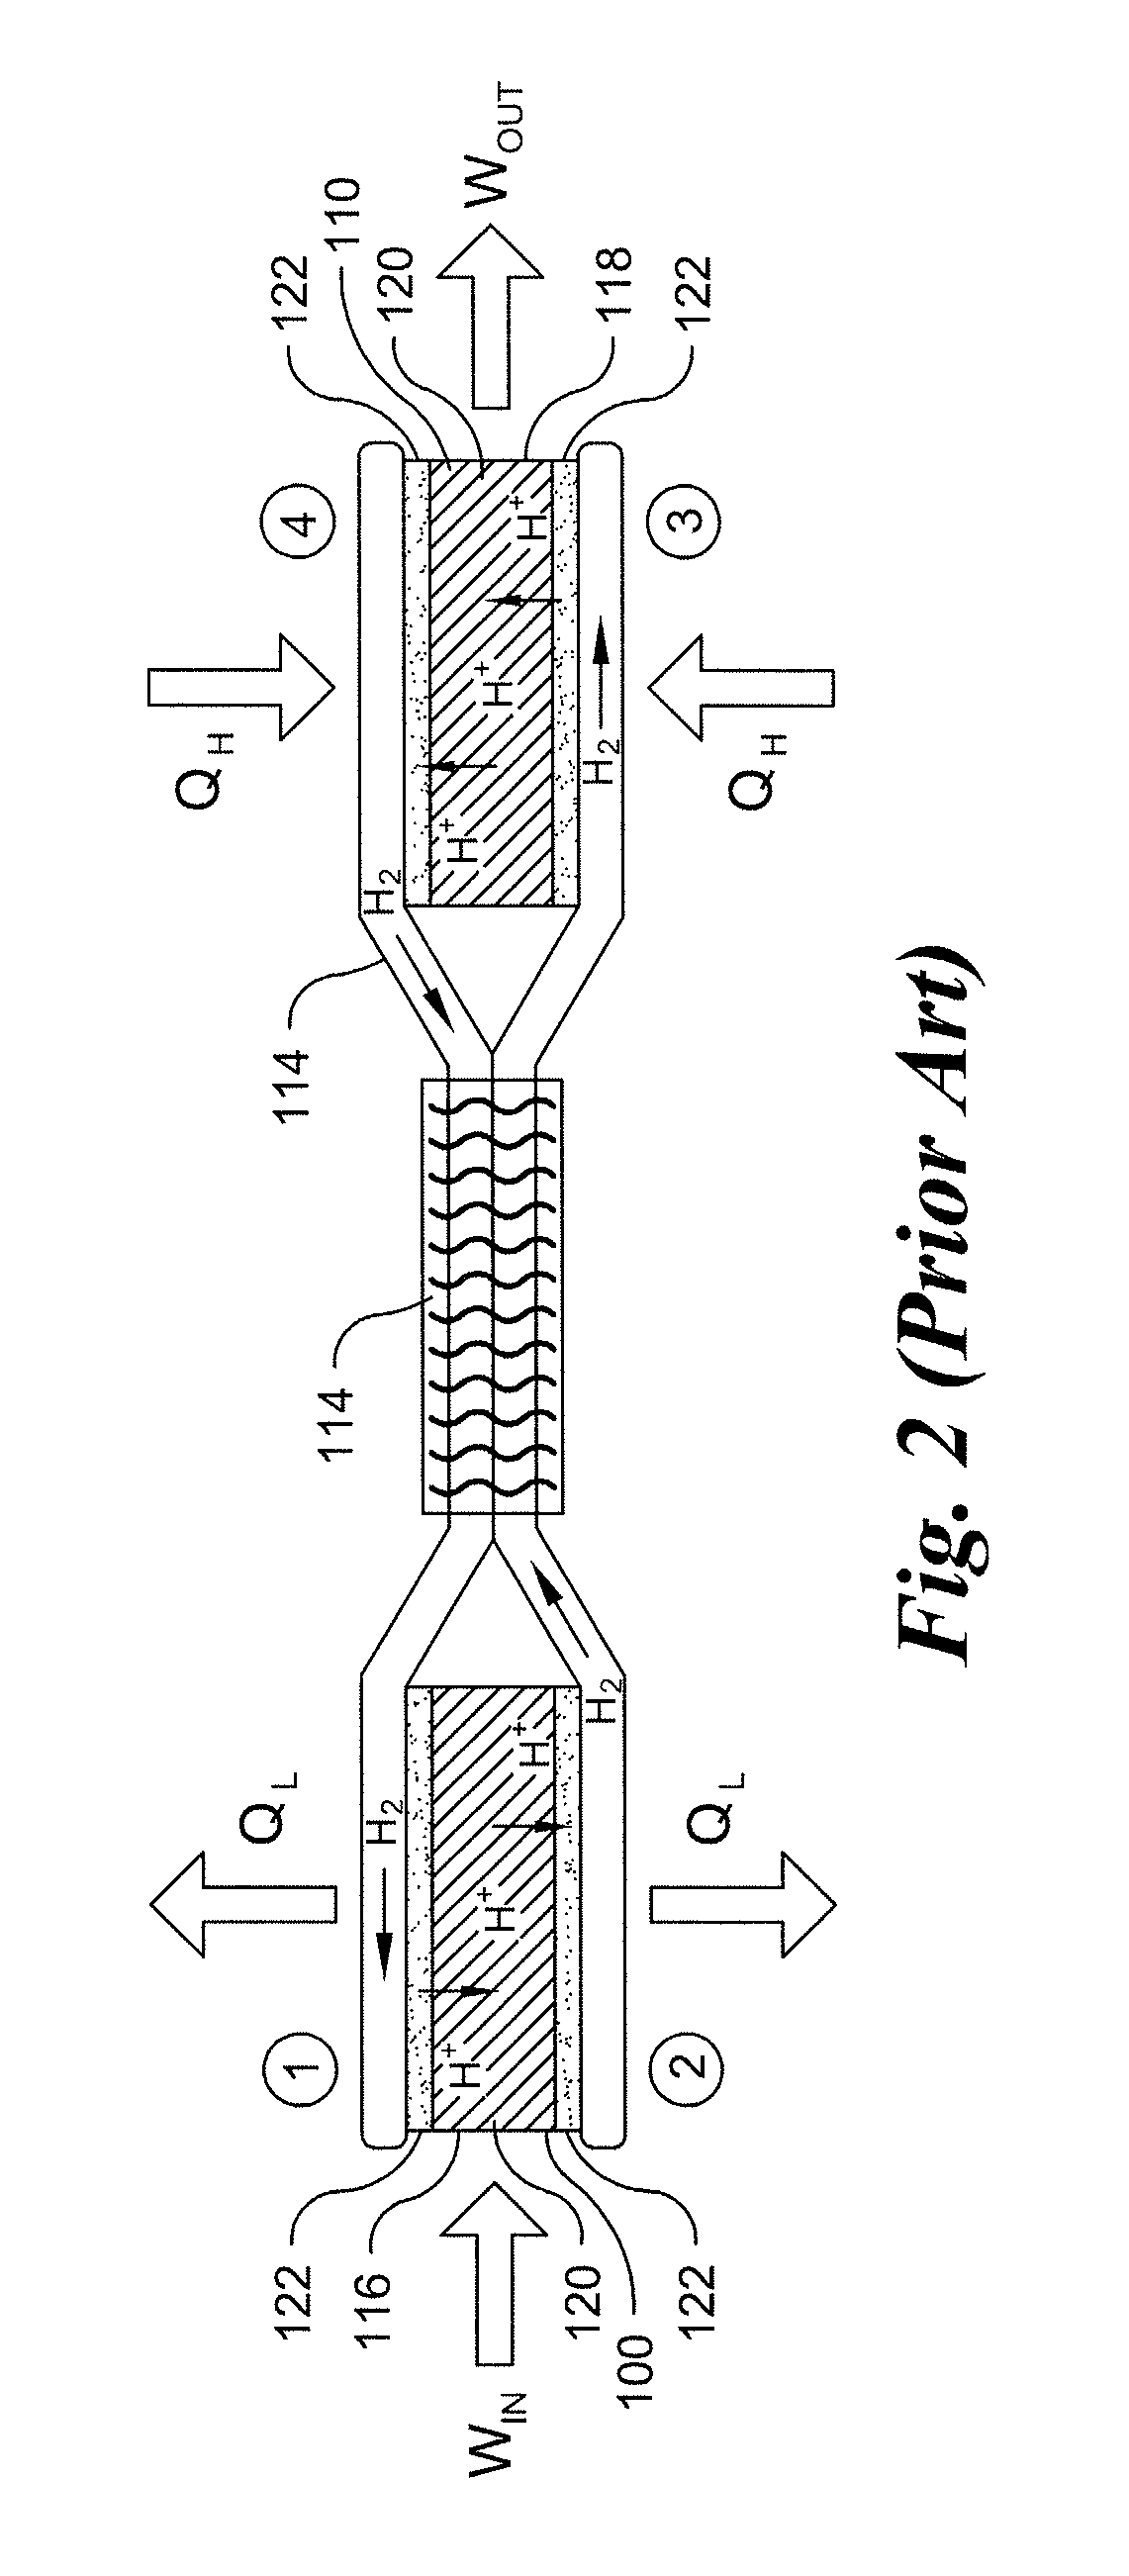 Thermo-electrochemical converter